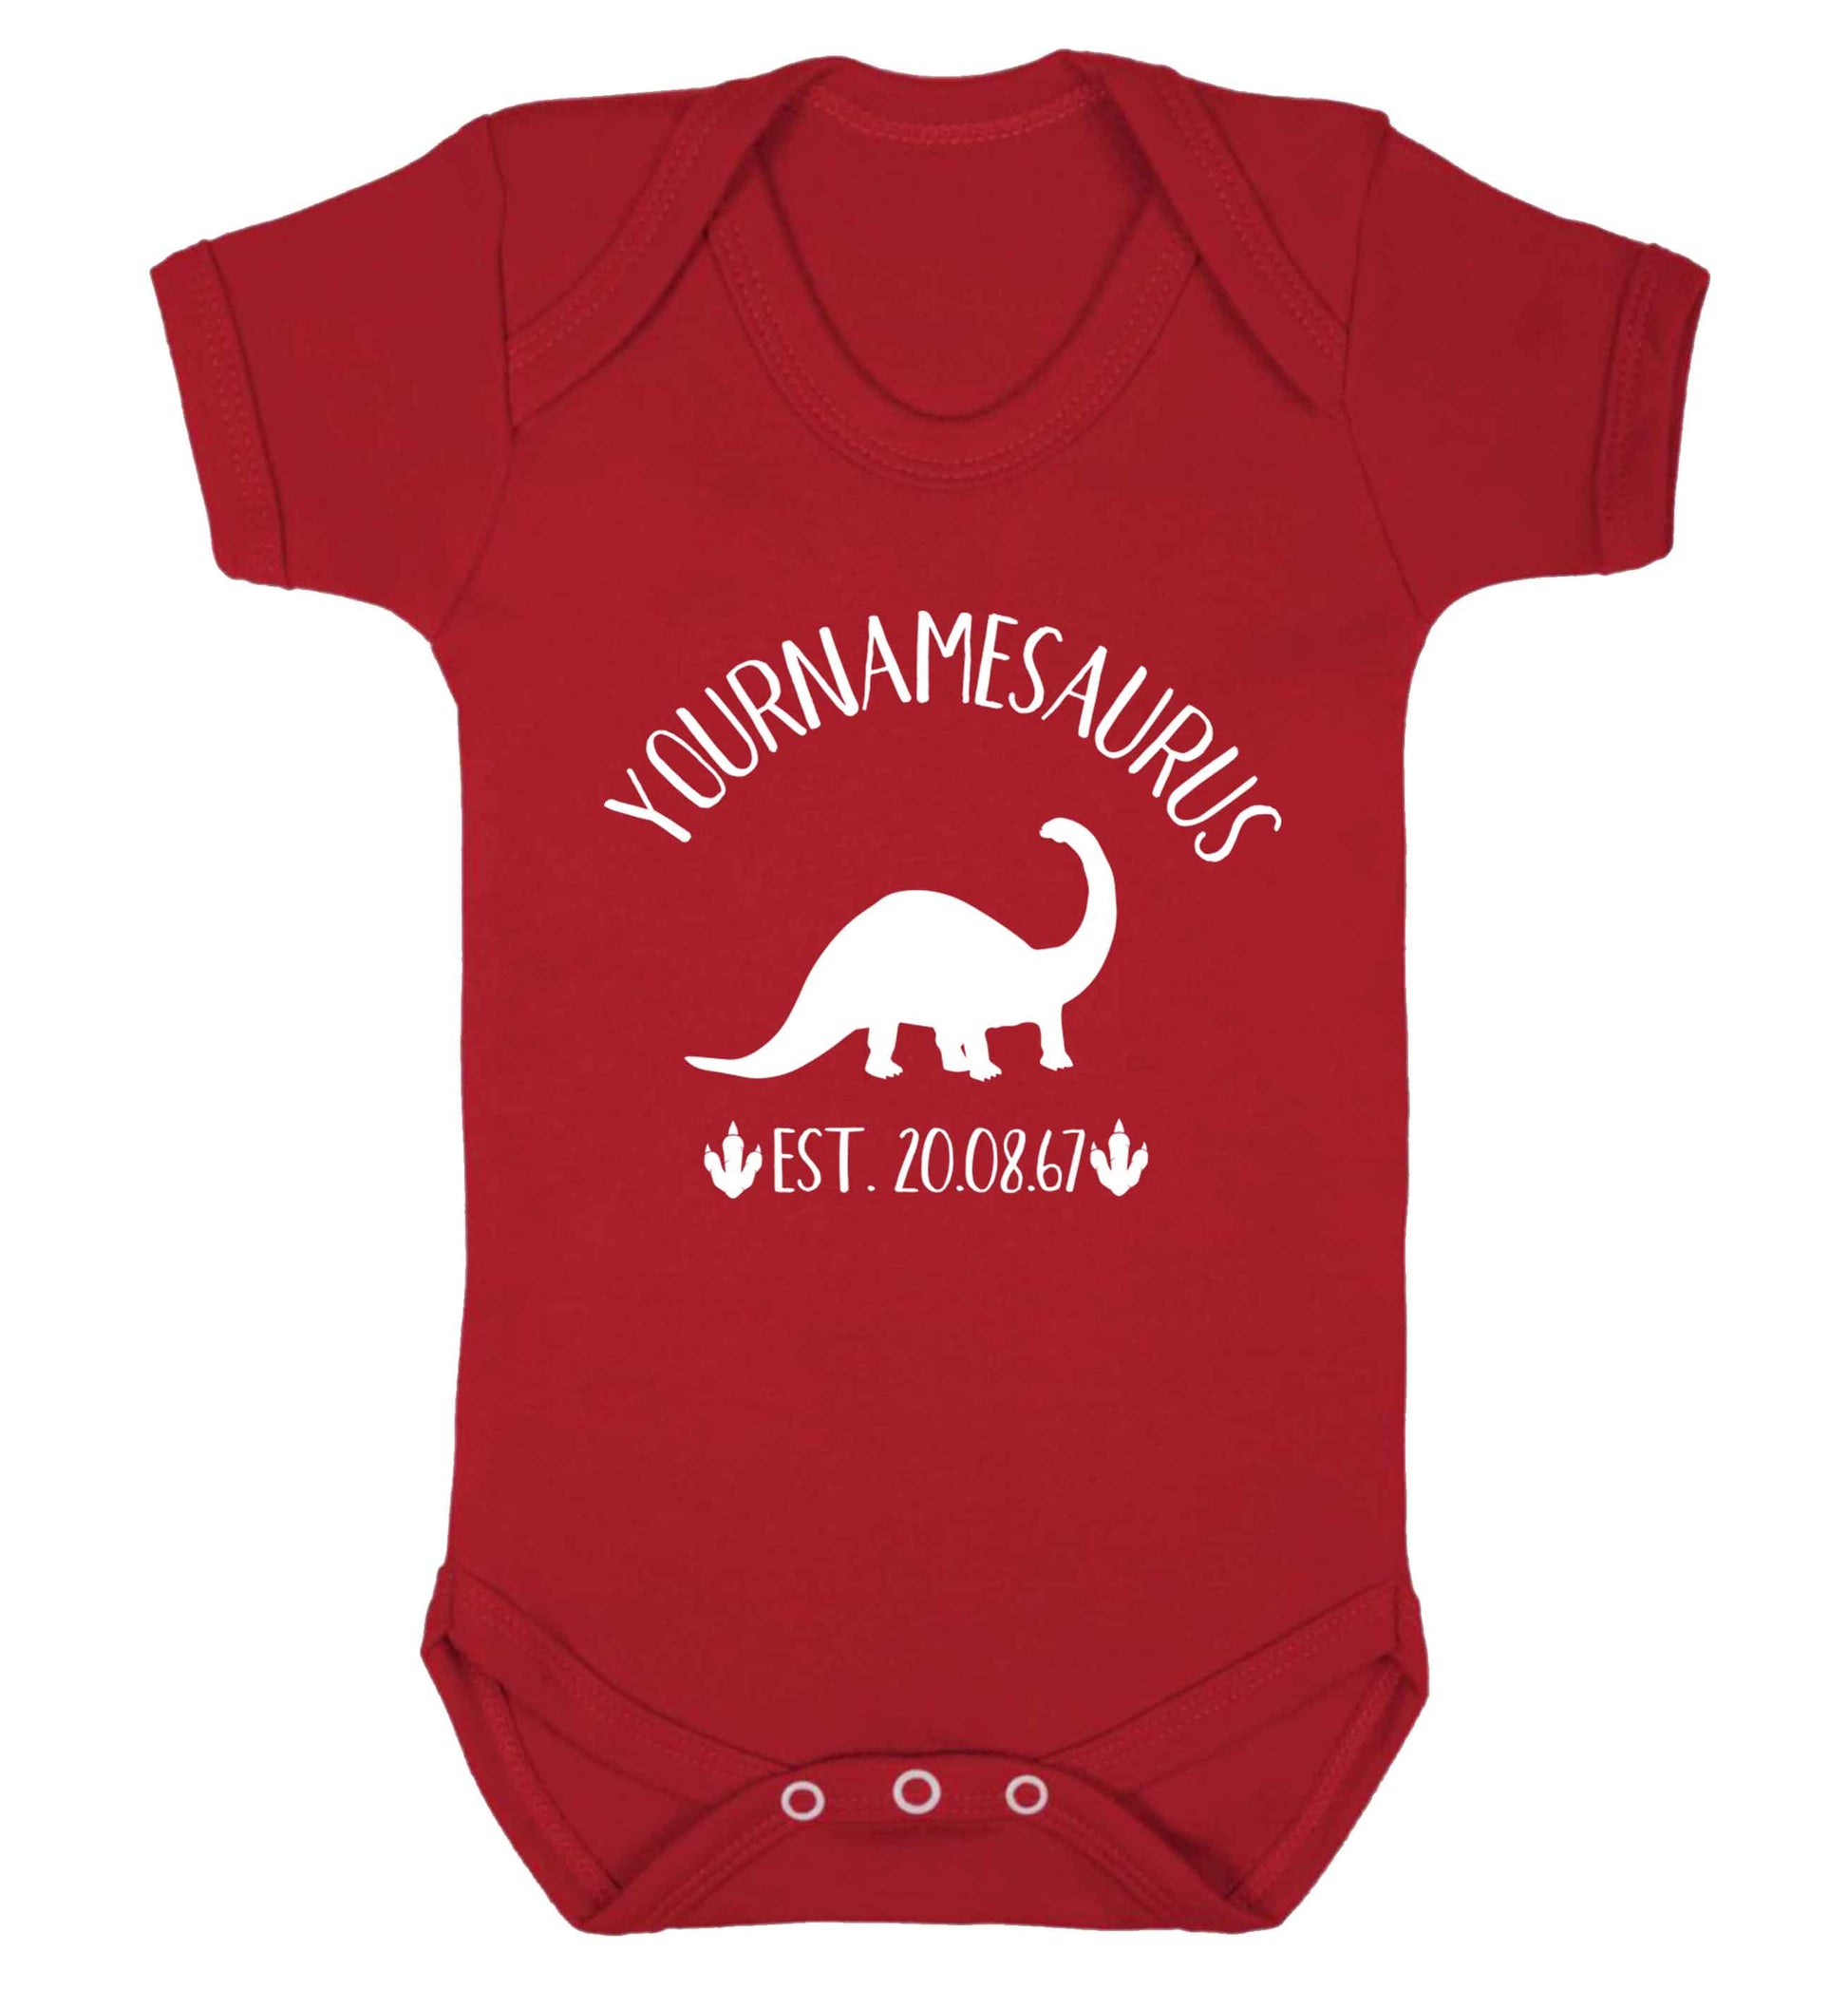 Personalised (your name) dinosaur birthday Baby Vest red 18-24 months